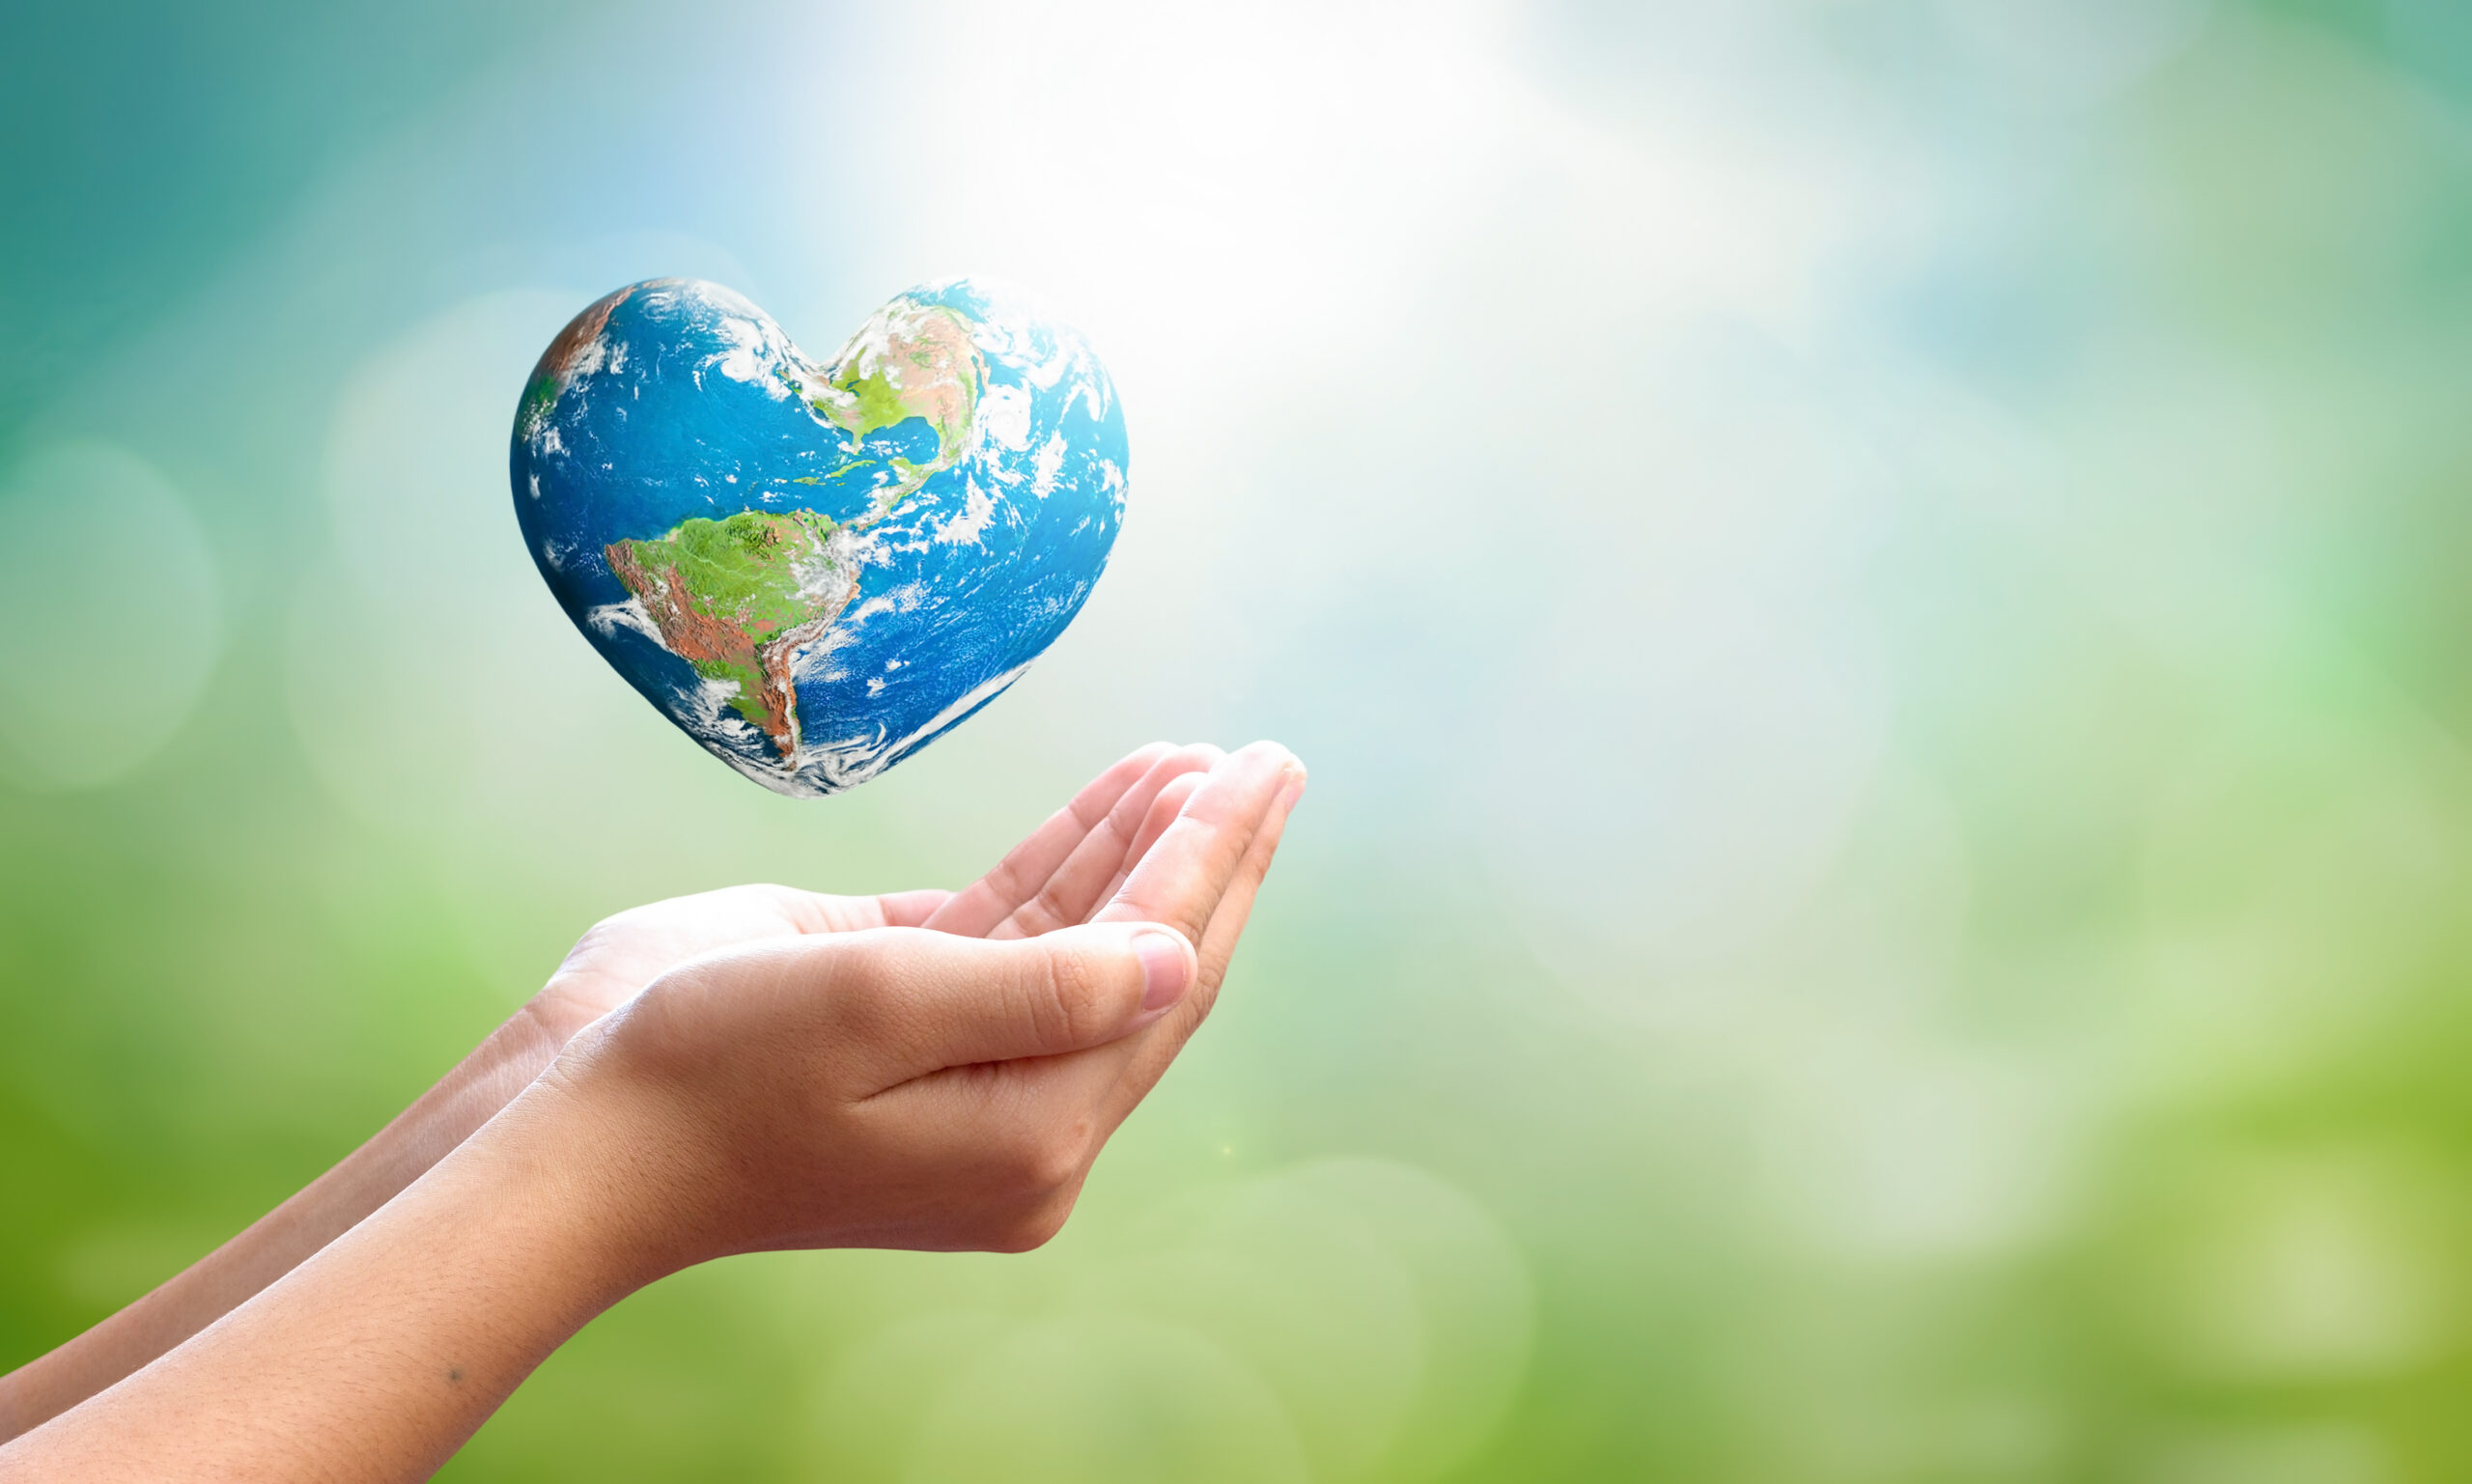 World environment day concept: man opens palms and drags heart shaped earth globe over blurred blue sky and water background. Elements of this image furnished by NASA. To illustrate root-cause healthcare